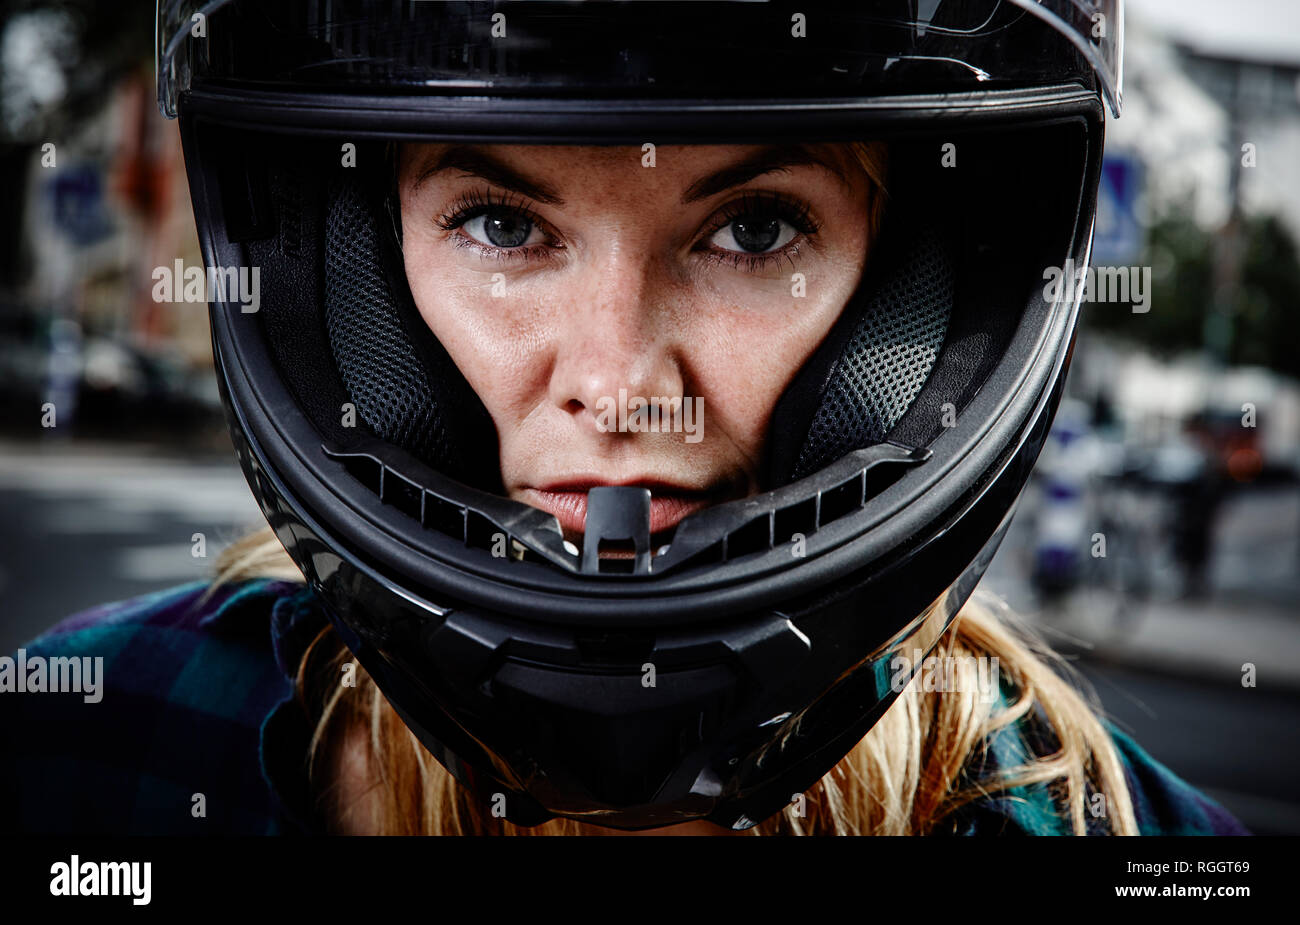 Portrait of confident young woman wearing motorcycle helmet Stock Photo - Alamy